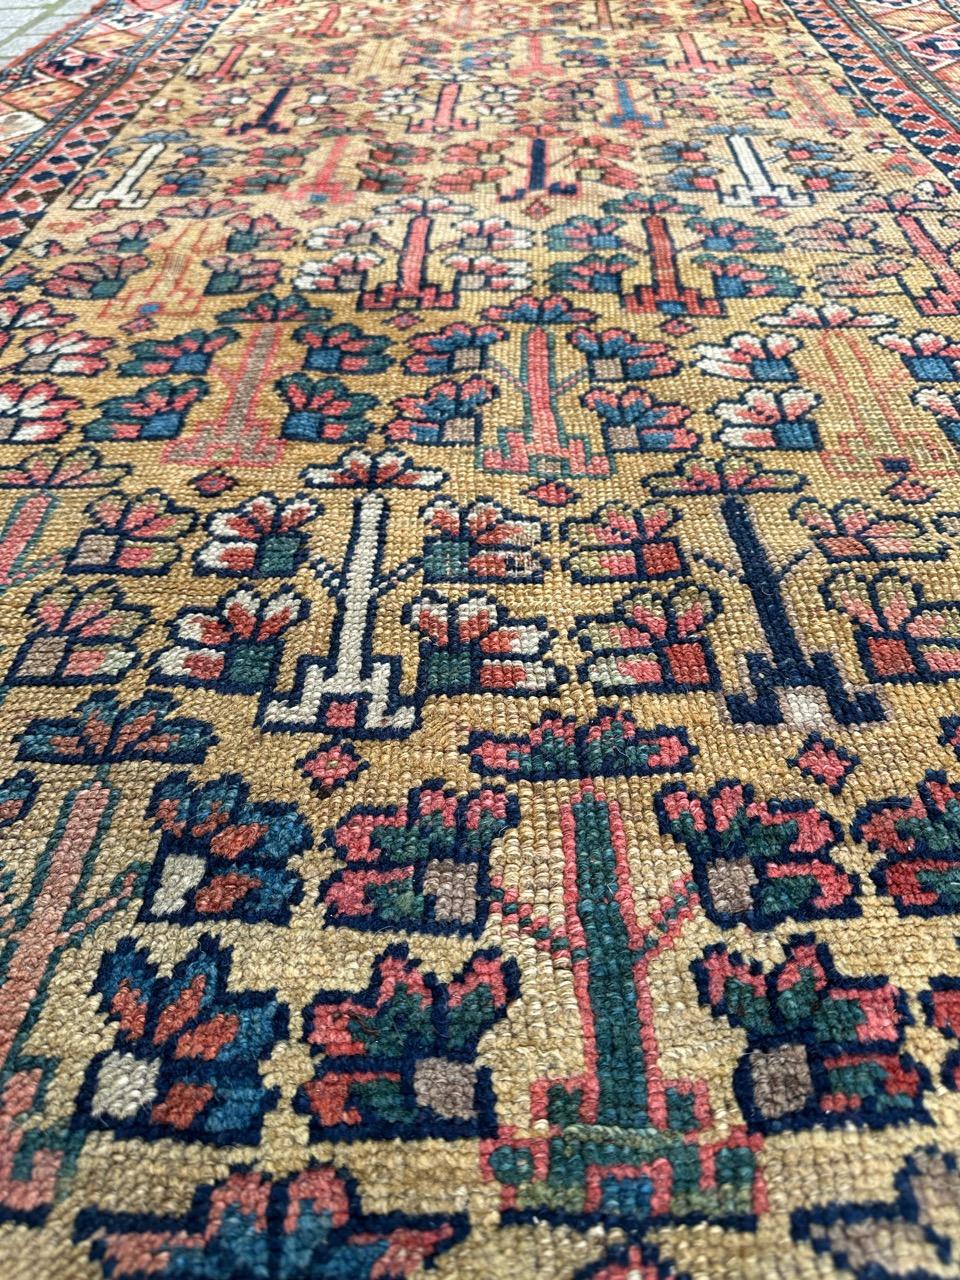 Wonderful Antique Tribal Collectible Kurdish or Caucasian Rug For Sale 9